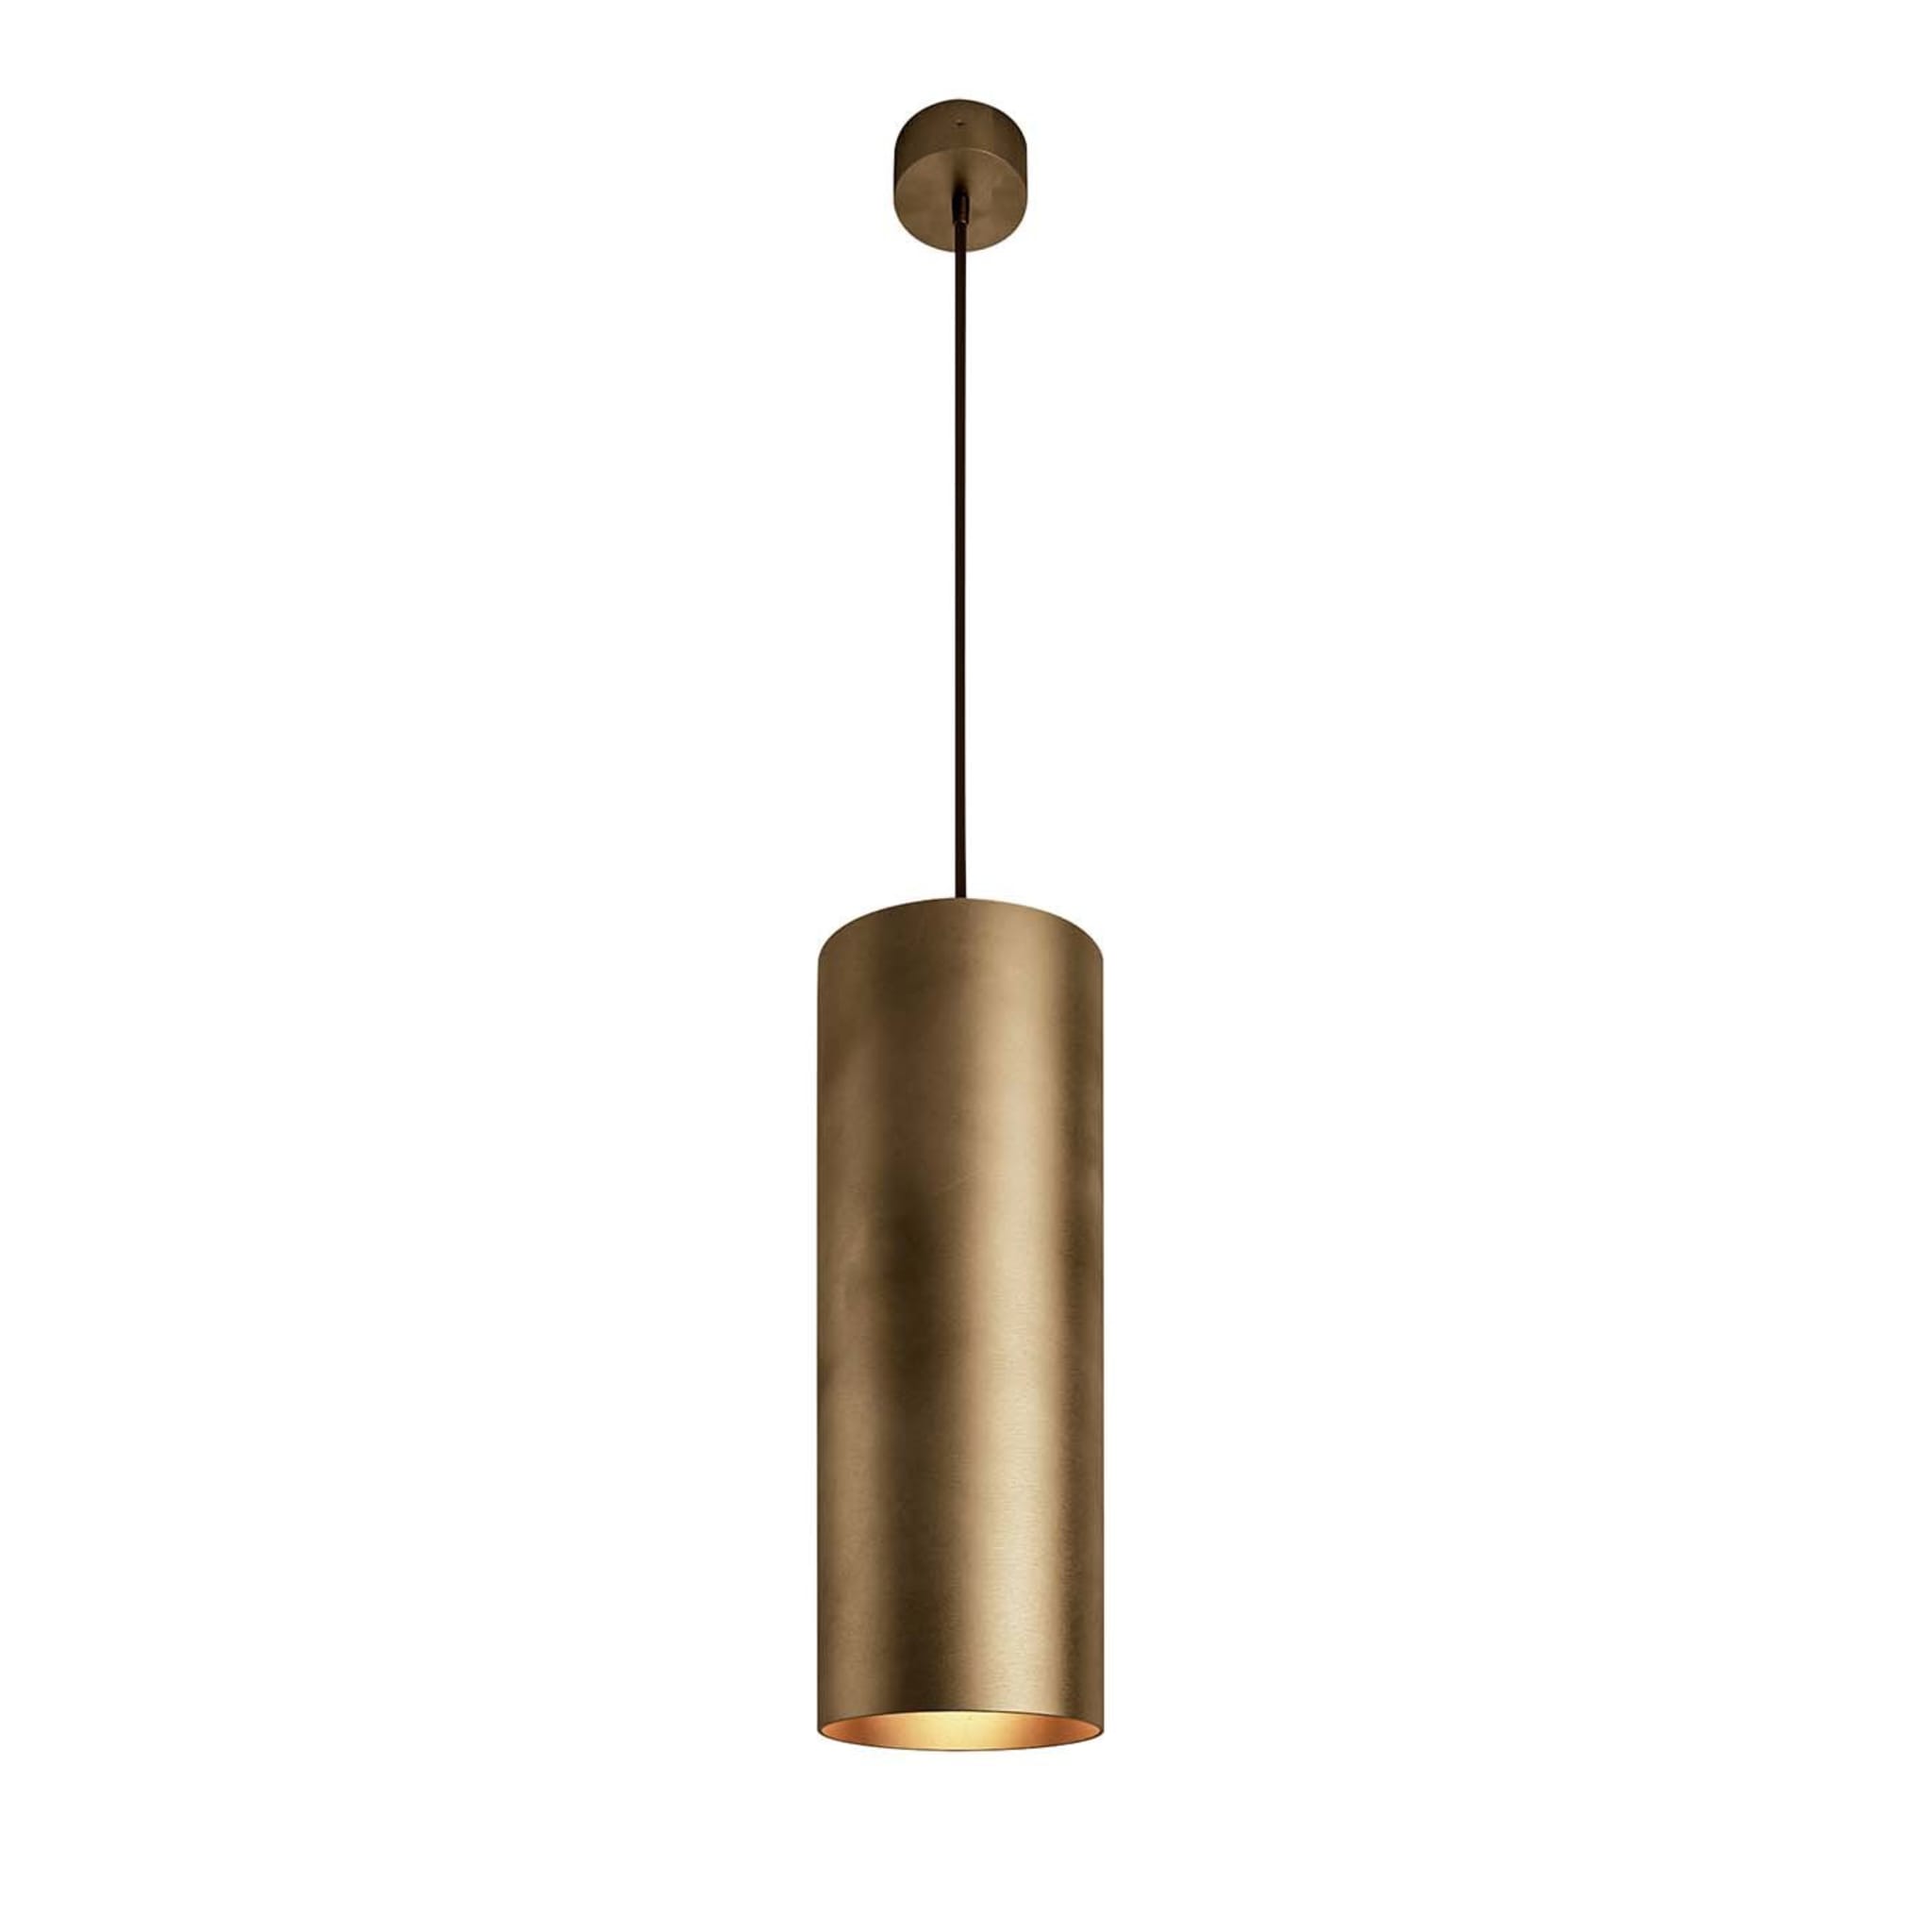 Sunshine 150 Pendant Lamp by Marco Pollice - Main view